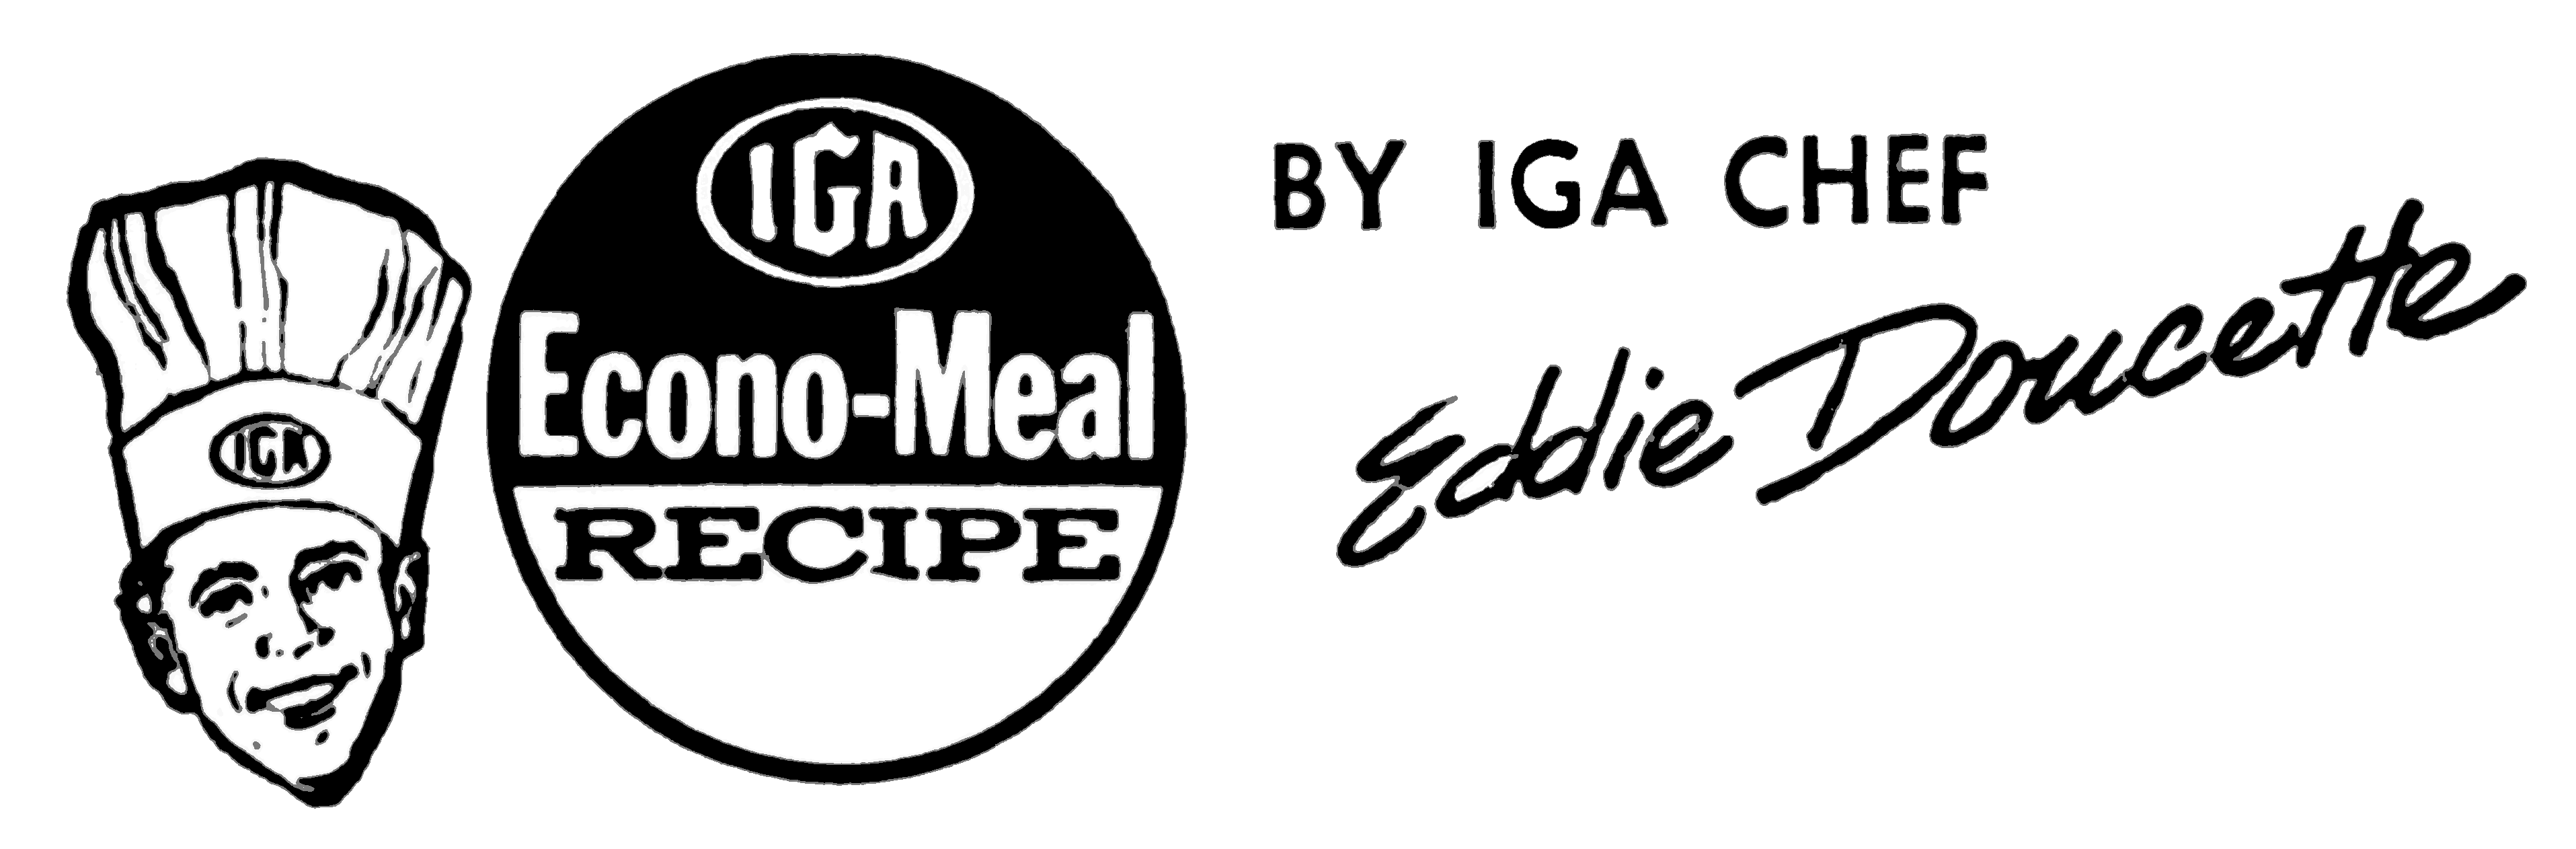 Econo-Meal Recipe by IGA Chef Eddie Doucette